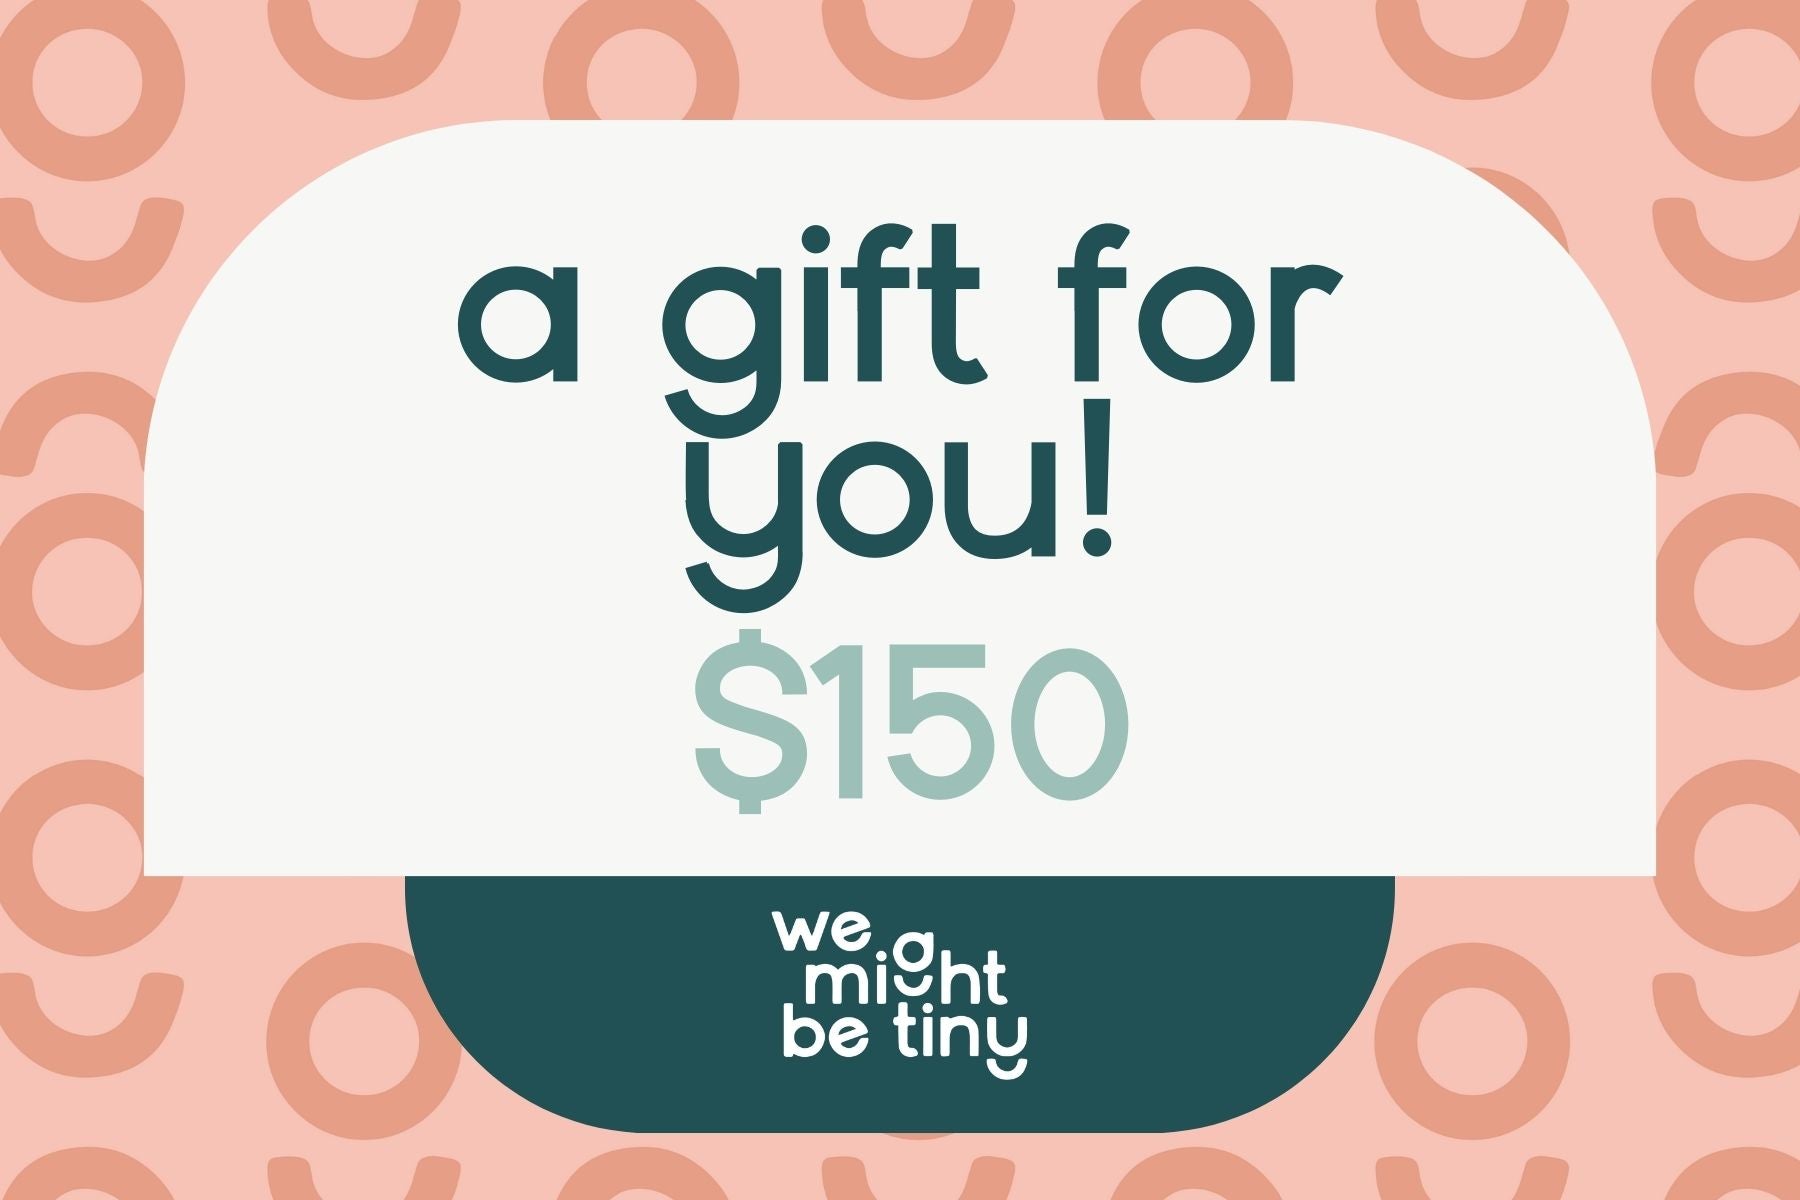 Gift Voucher - We Might Be Tiny $150